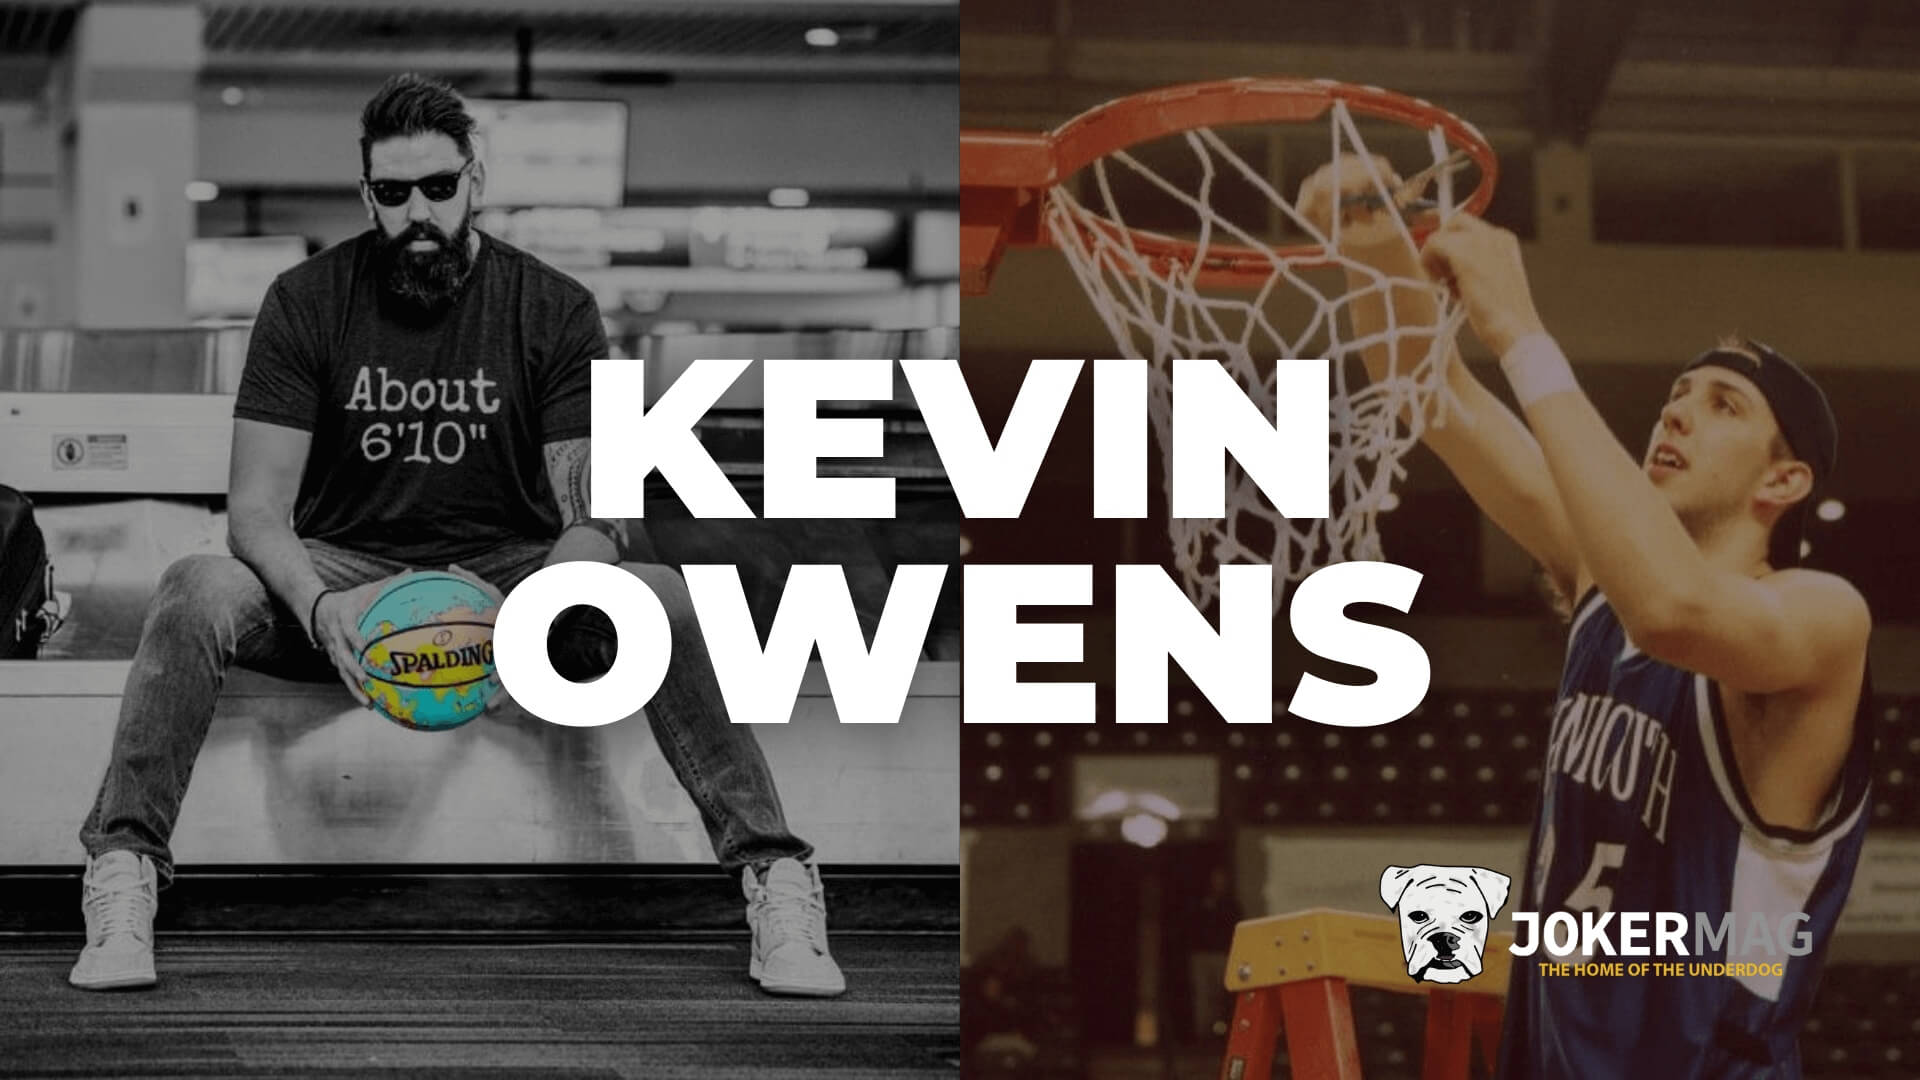 Former professional basketball player Kevin Owens sits down for an interview with Joker Mag, the home of the underdog